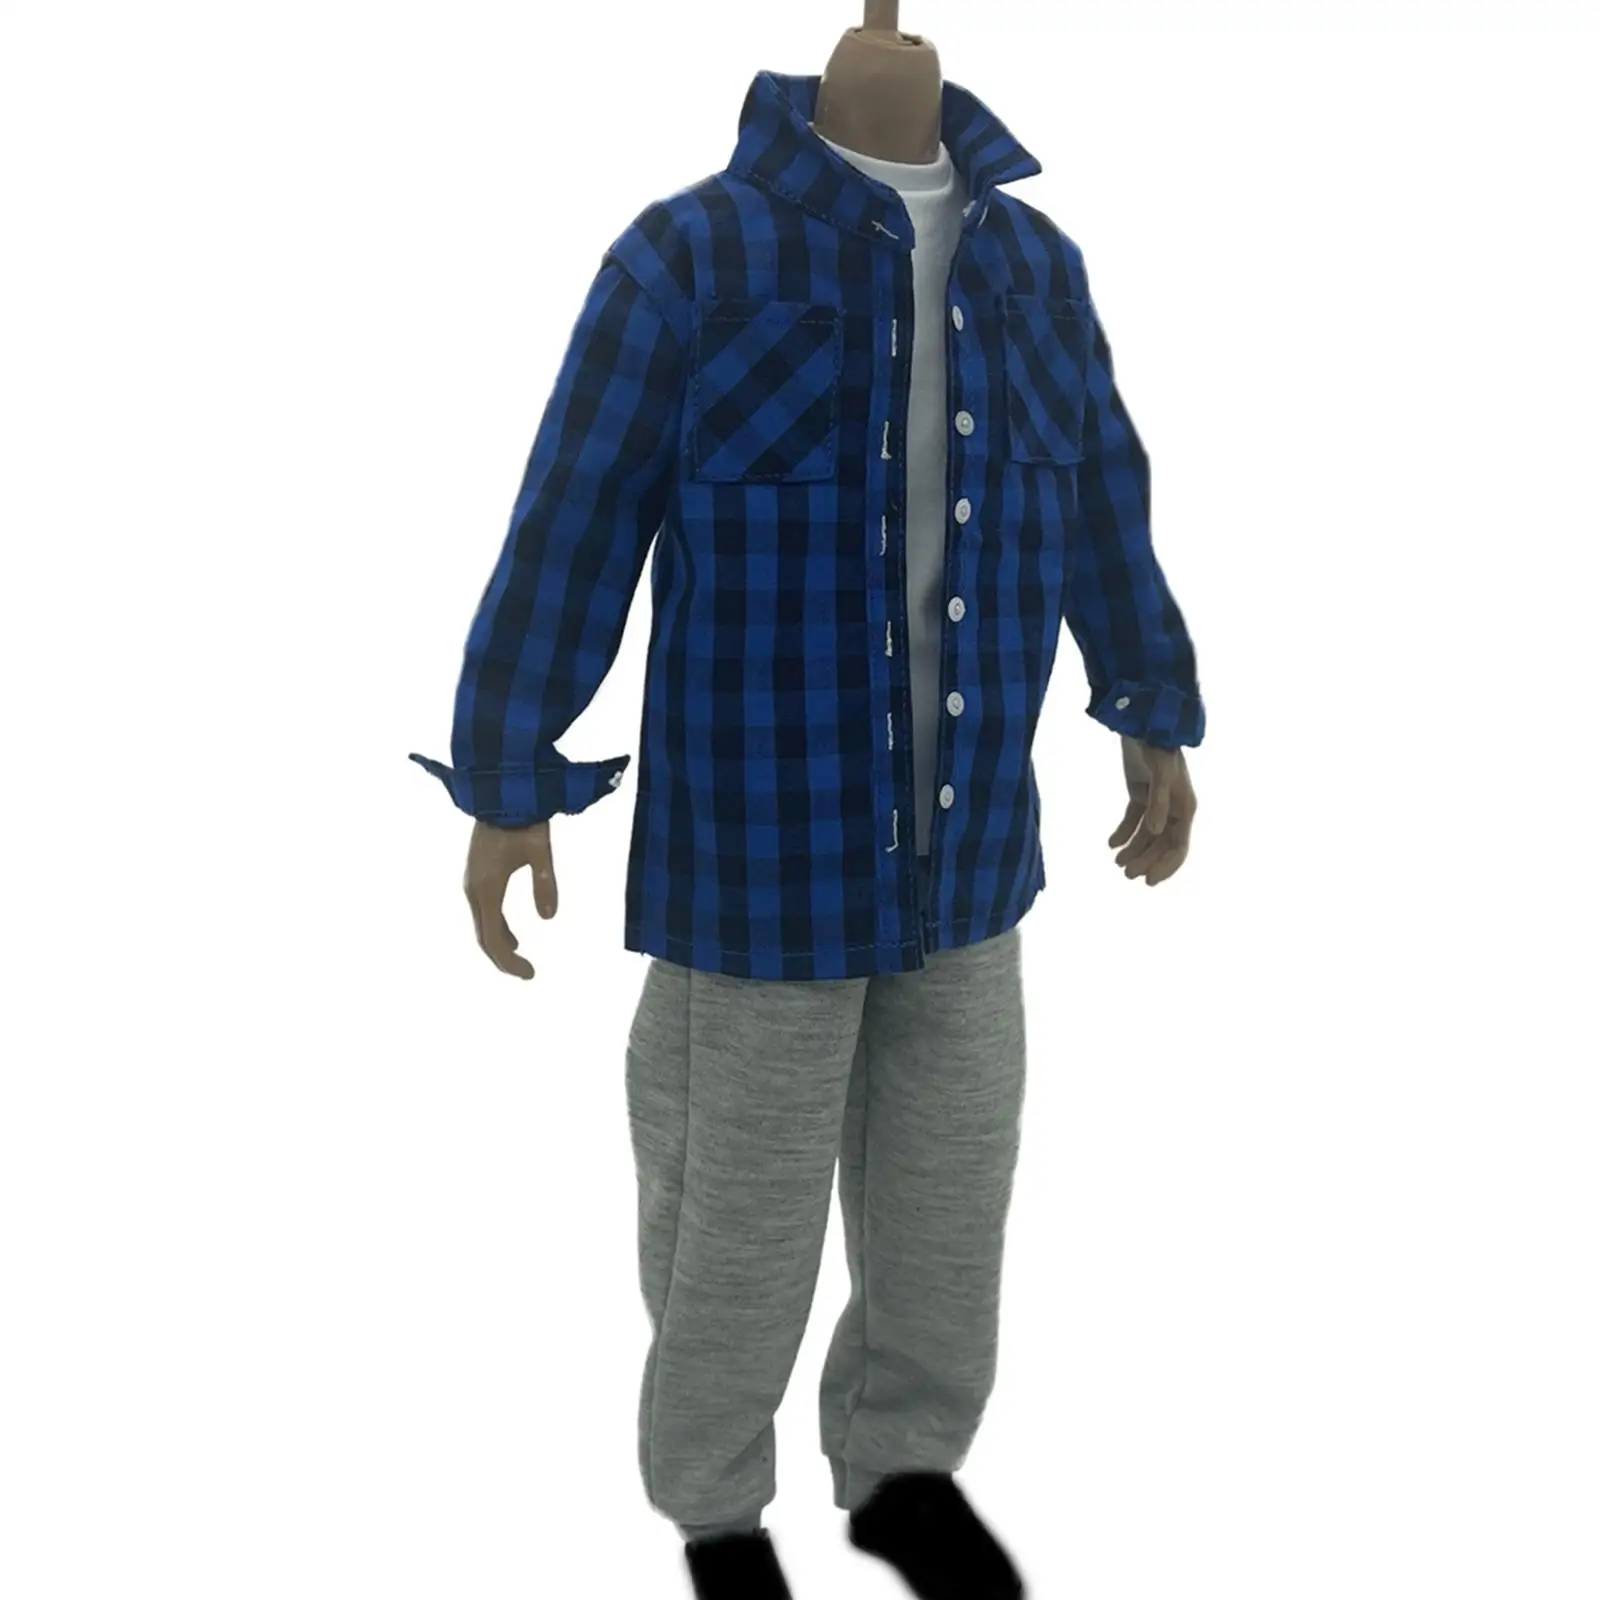 

1:6 Scale Clothes Set 12 inch Male Action Figure Entertainment for Dollhouse Accessories